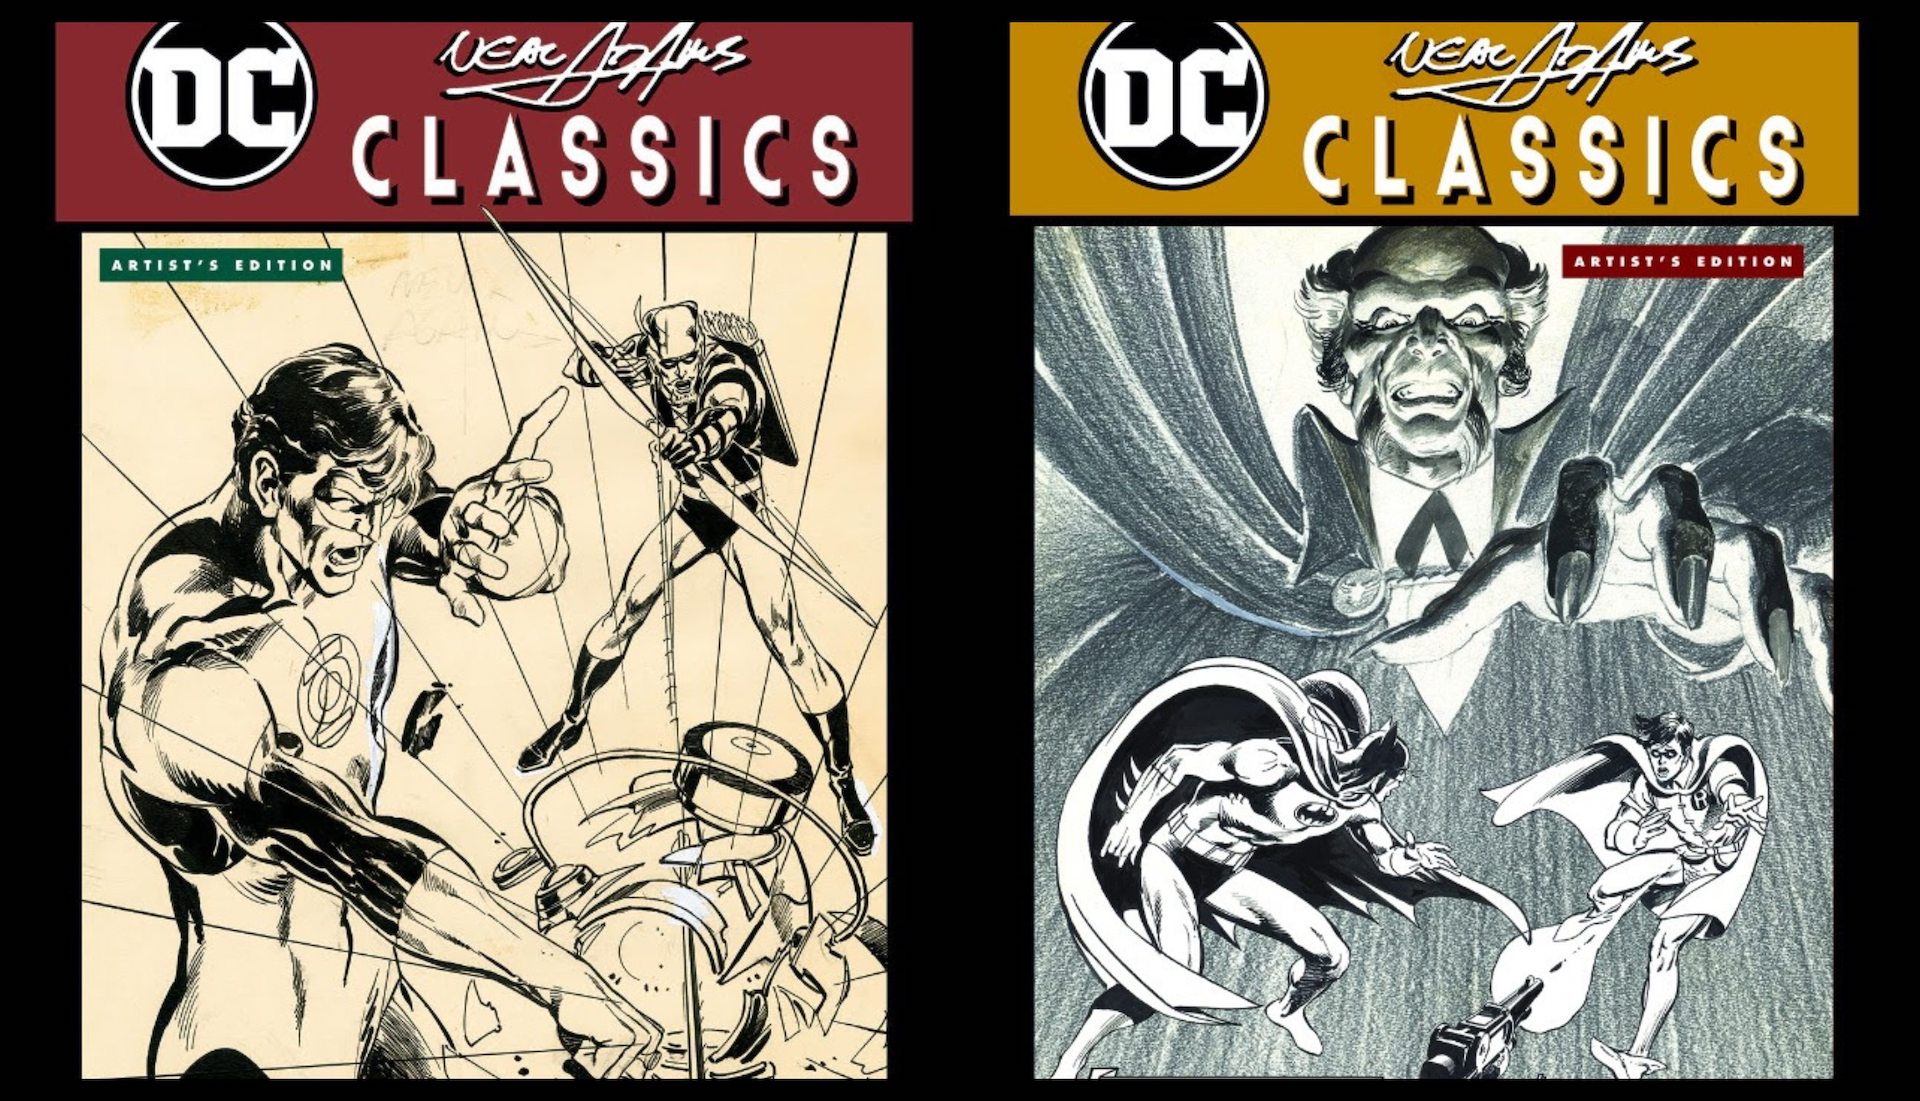 IDW adds DC titles to Artist Editions including 'Batman: Year One' and Neal Adams classics